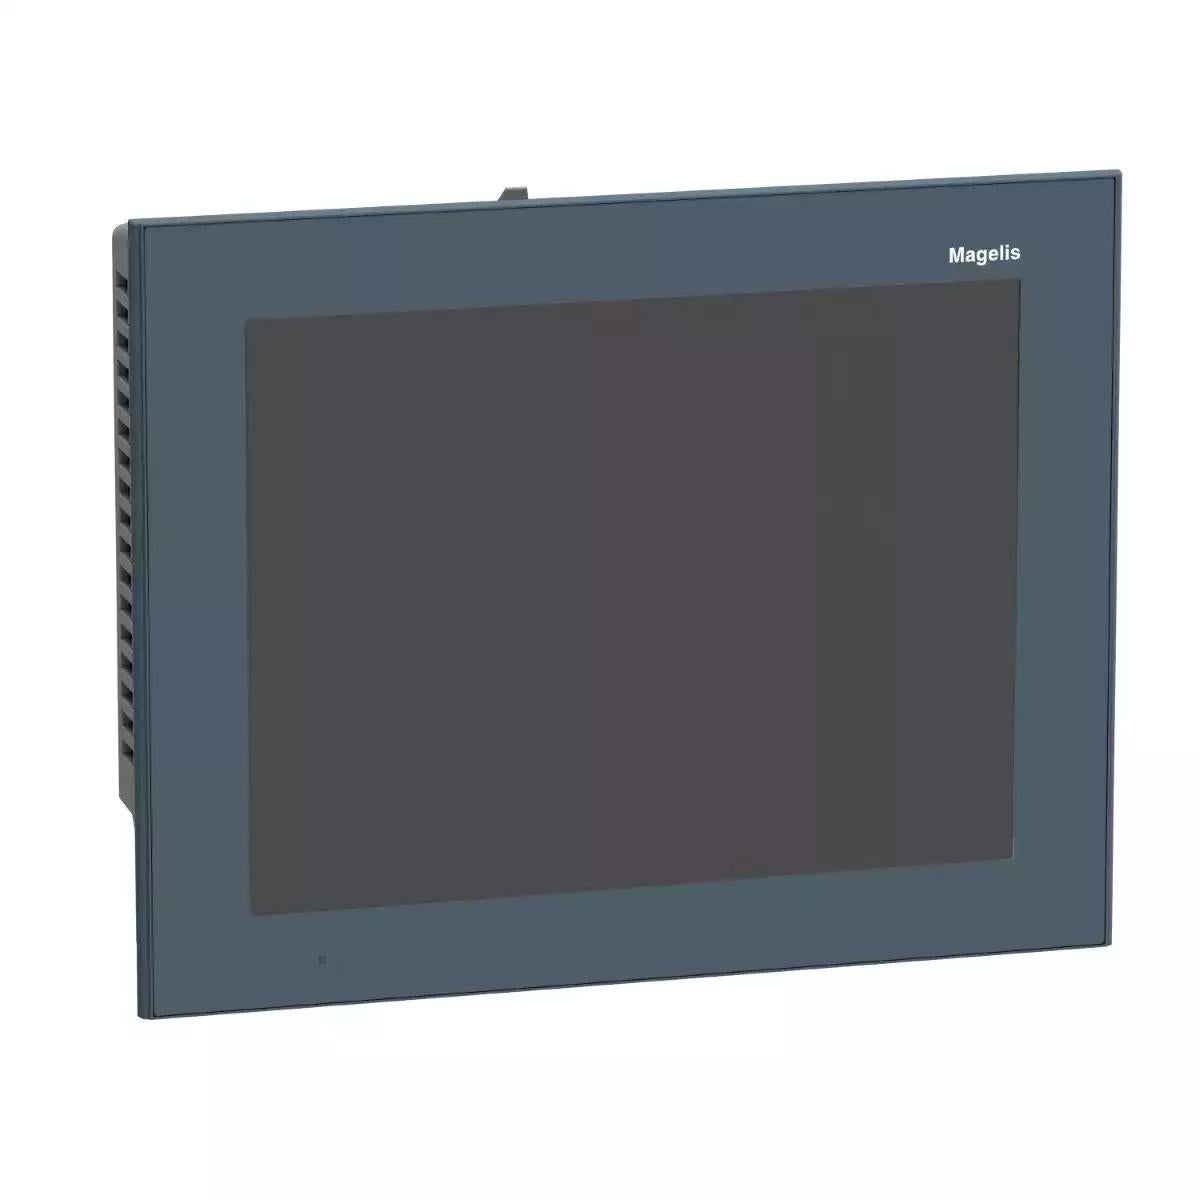 Advanced touchscreen panel, Harmony GTO, 10.4 Color Touch VGA Stainless, logo removed